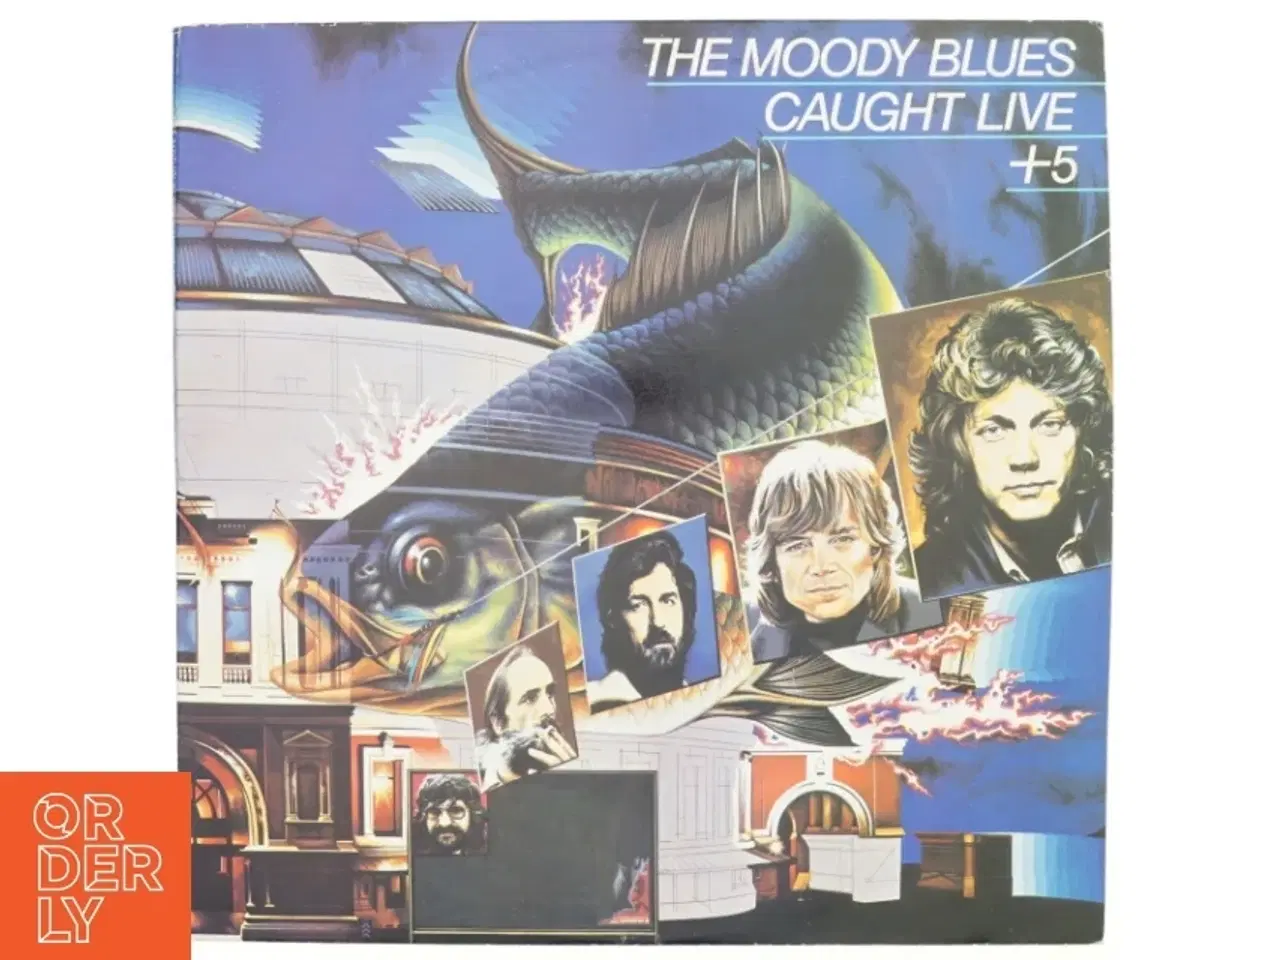 Billede 1 - The moody Blues, Caught live